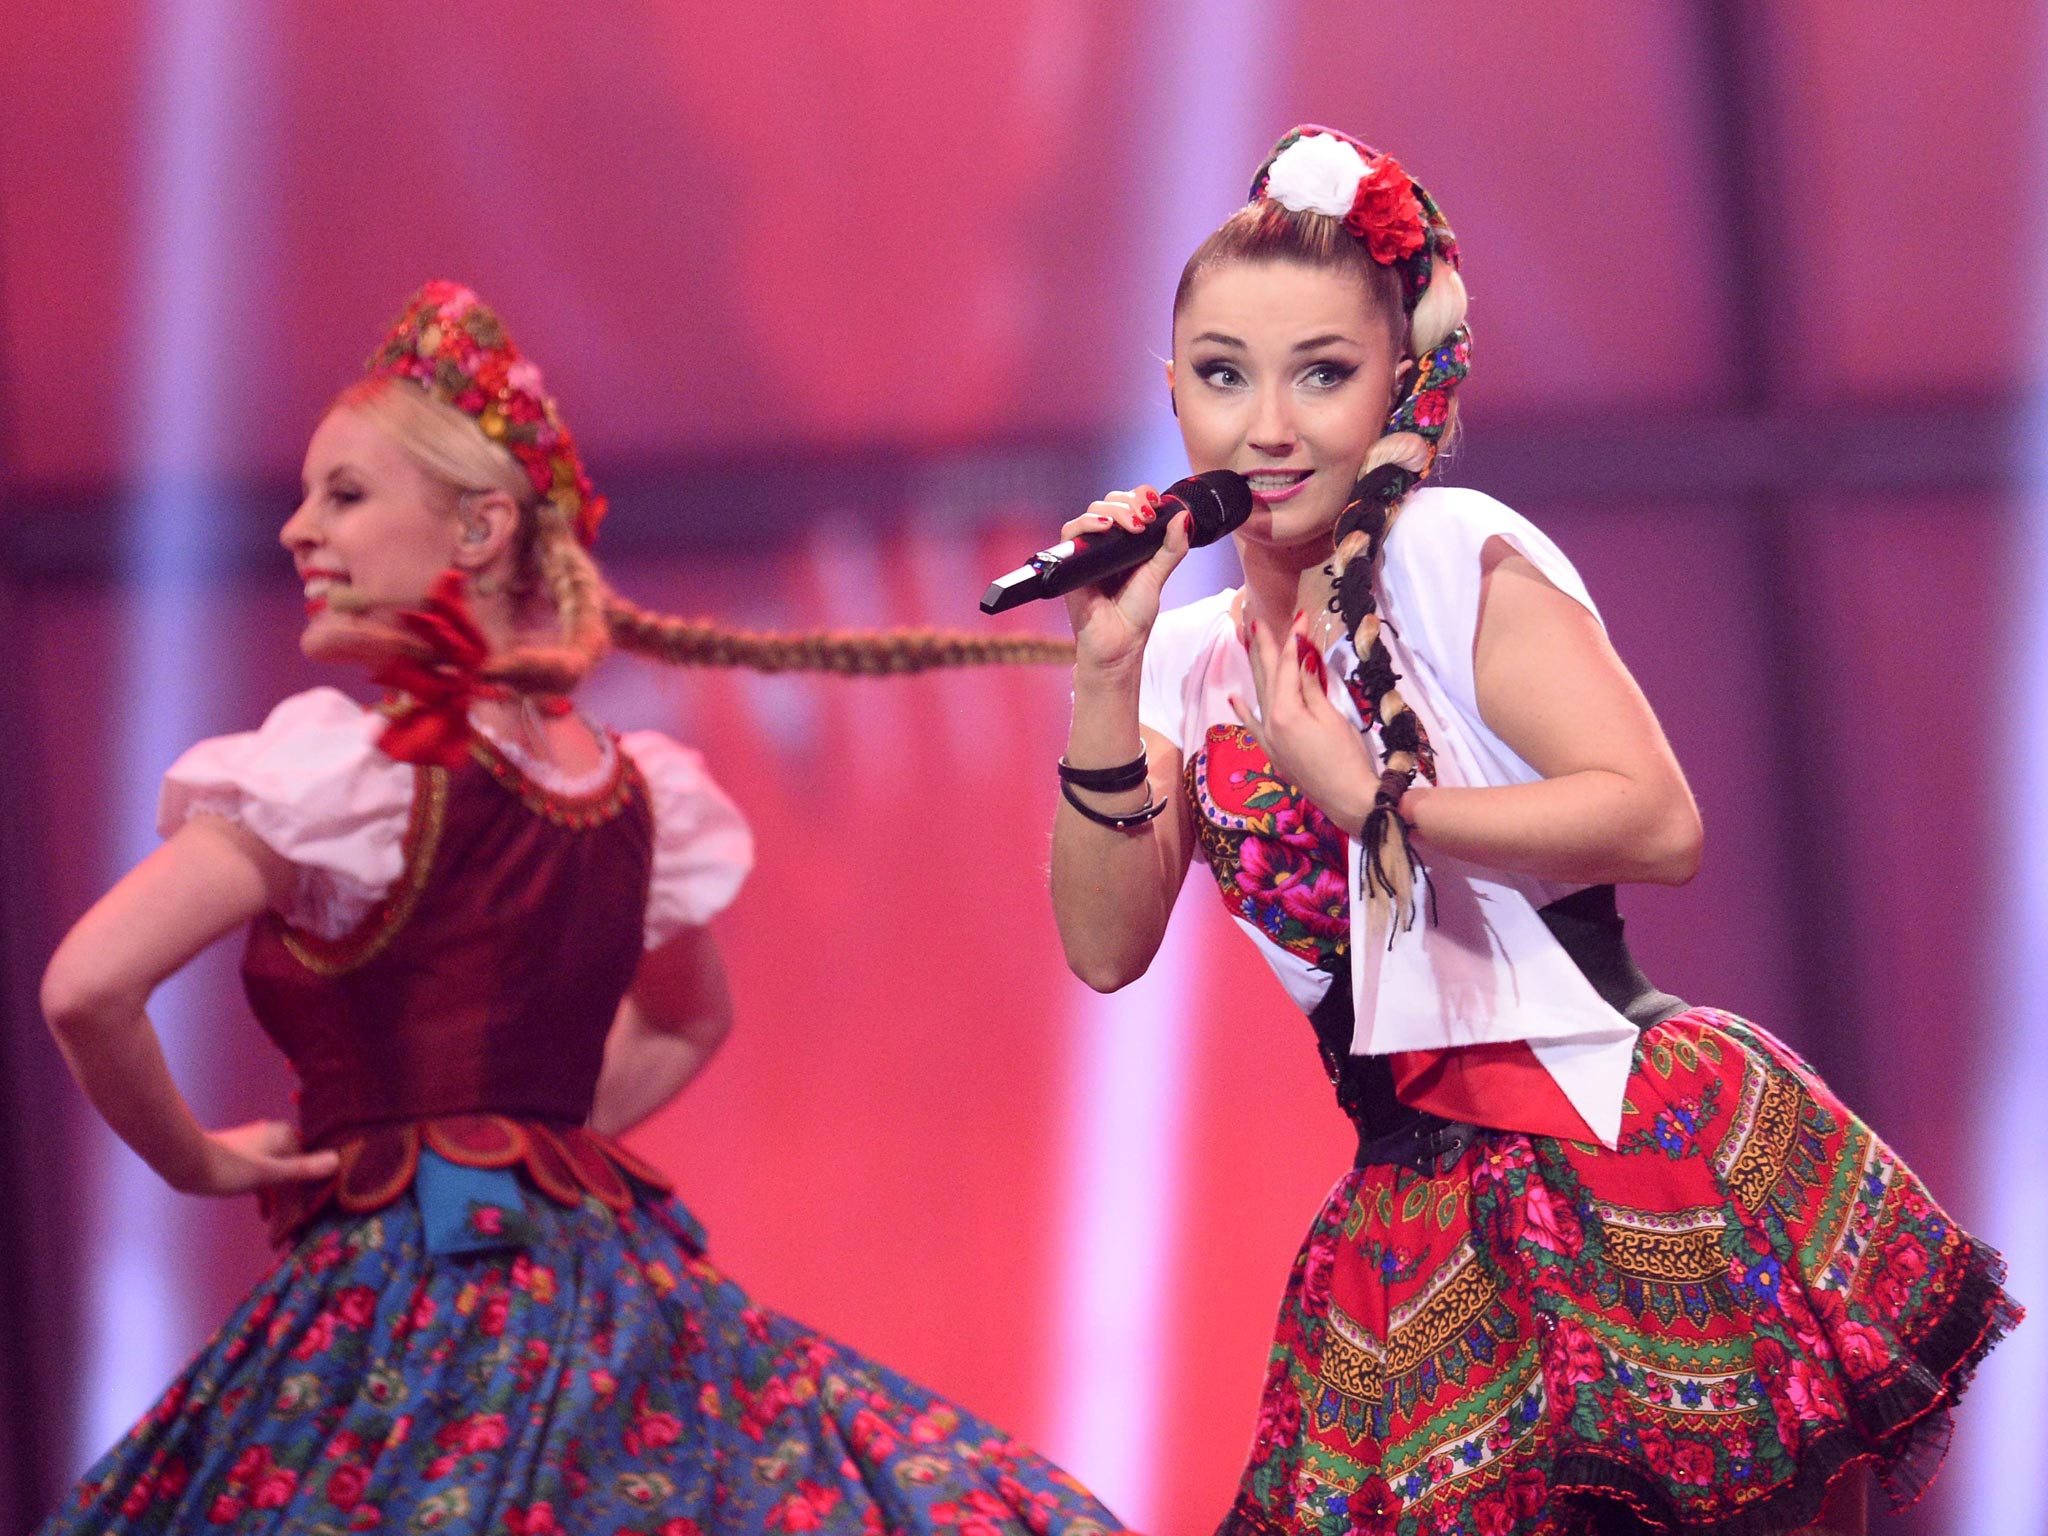 Cleo of Donatan & Cleo representing Poland performs during the Eurovision Song Contest 2014 Grand Final in Copenhagen, Denmark